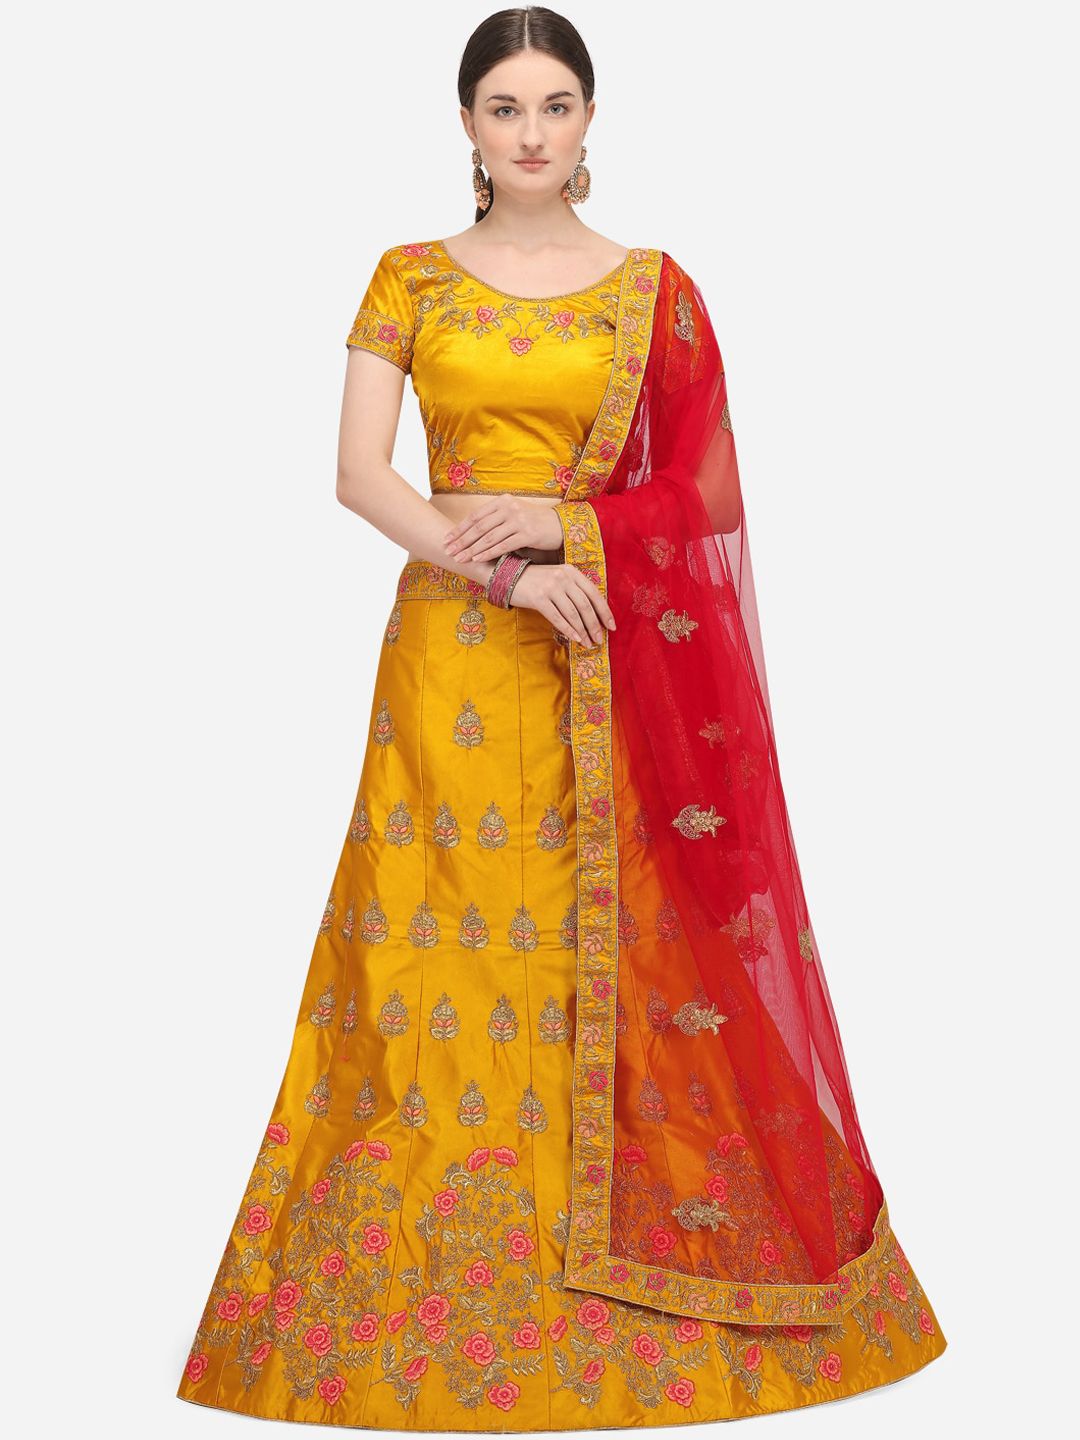 Netram Yellow & Red Embellished Semi-Stitched Lehenga & Unstitched Blouse with Dupatta Price in India